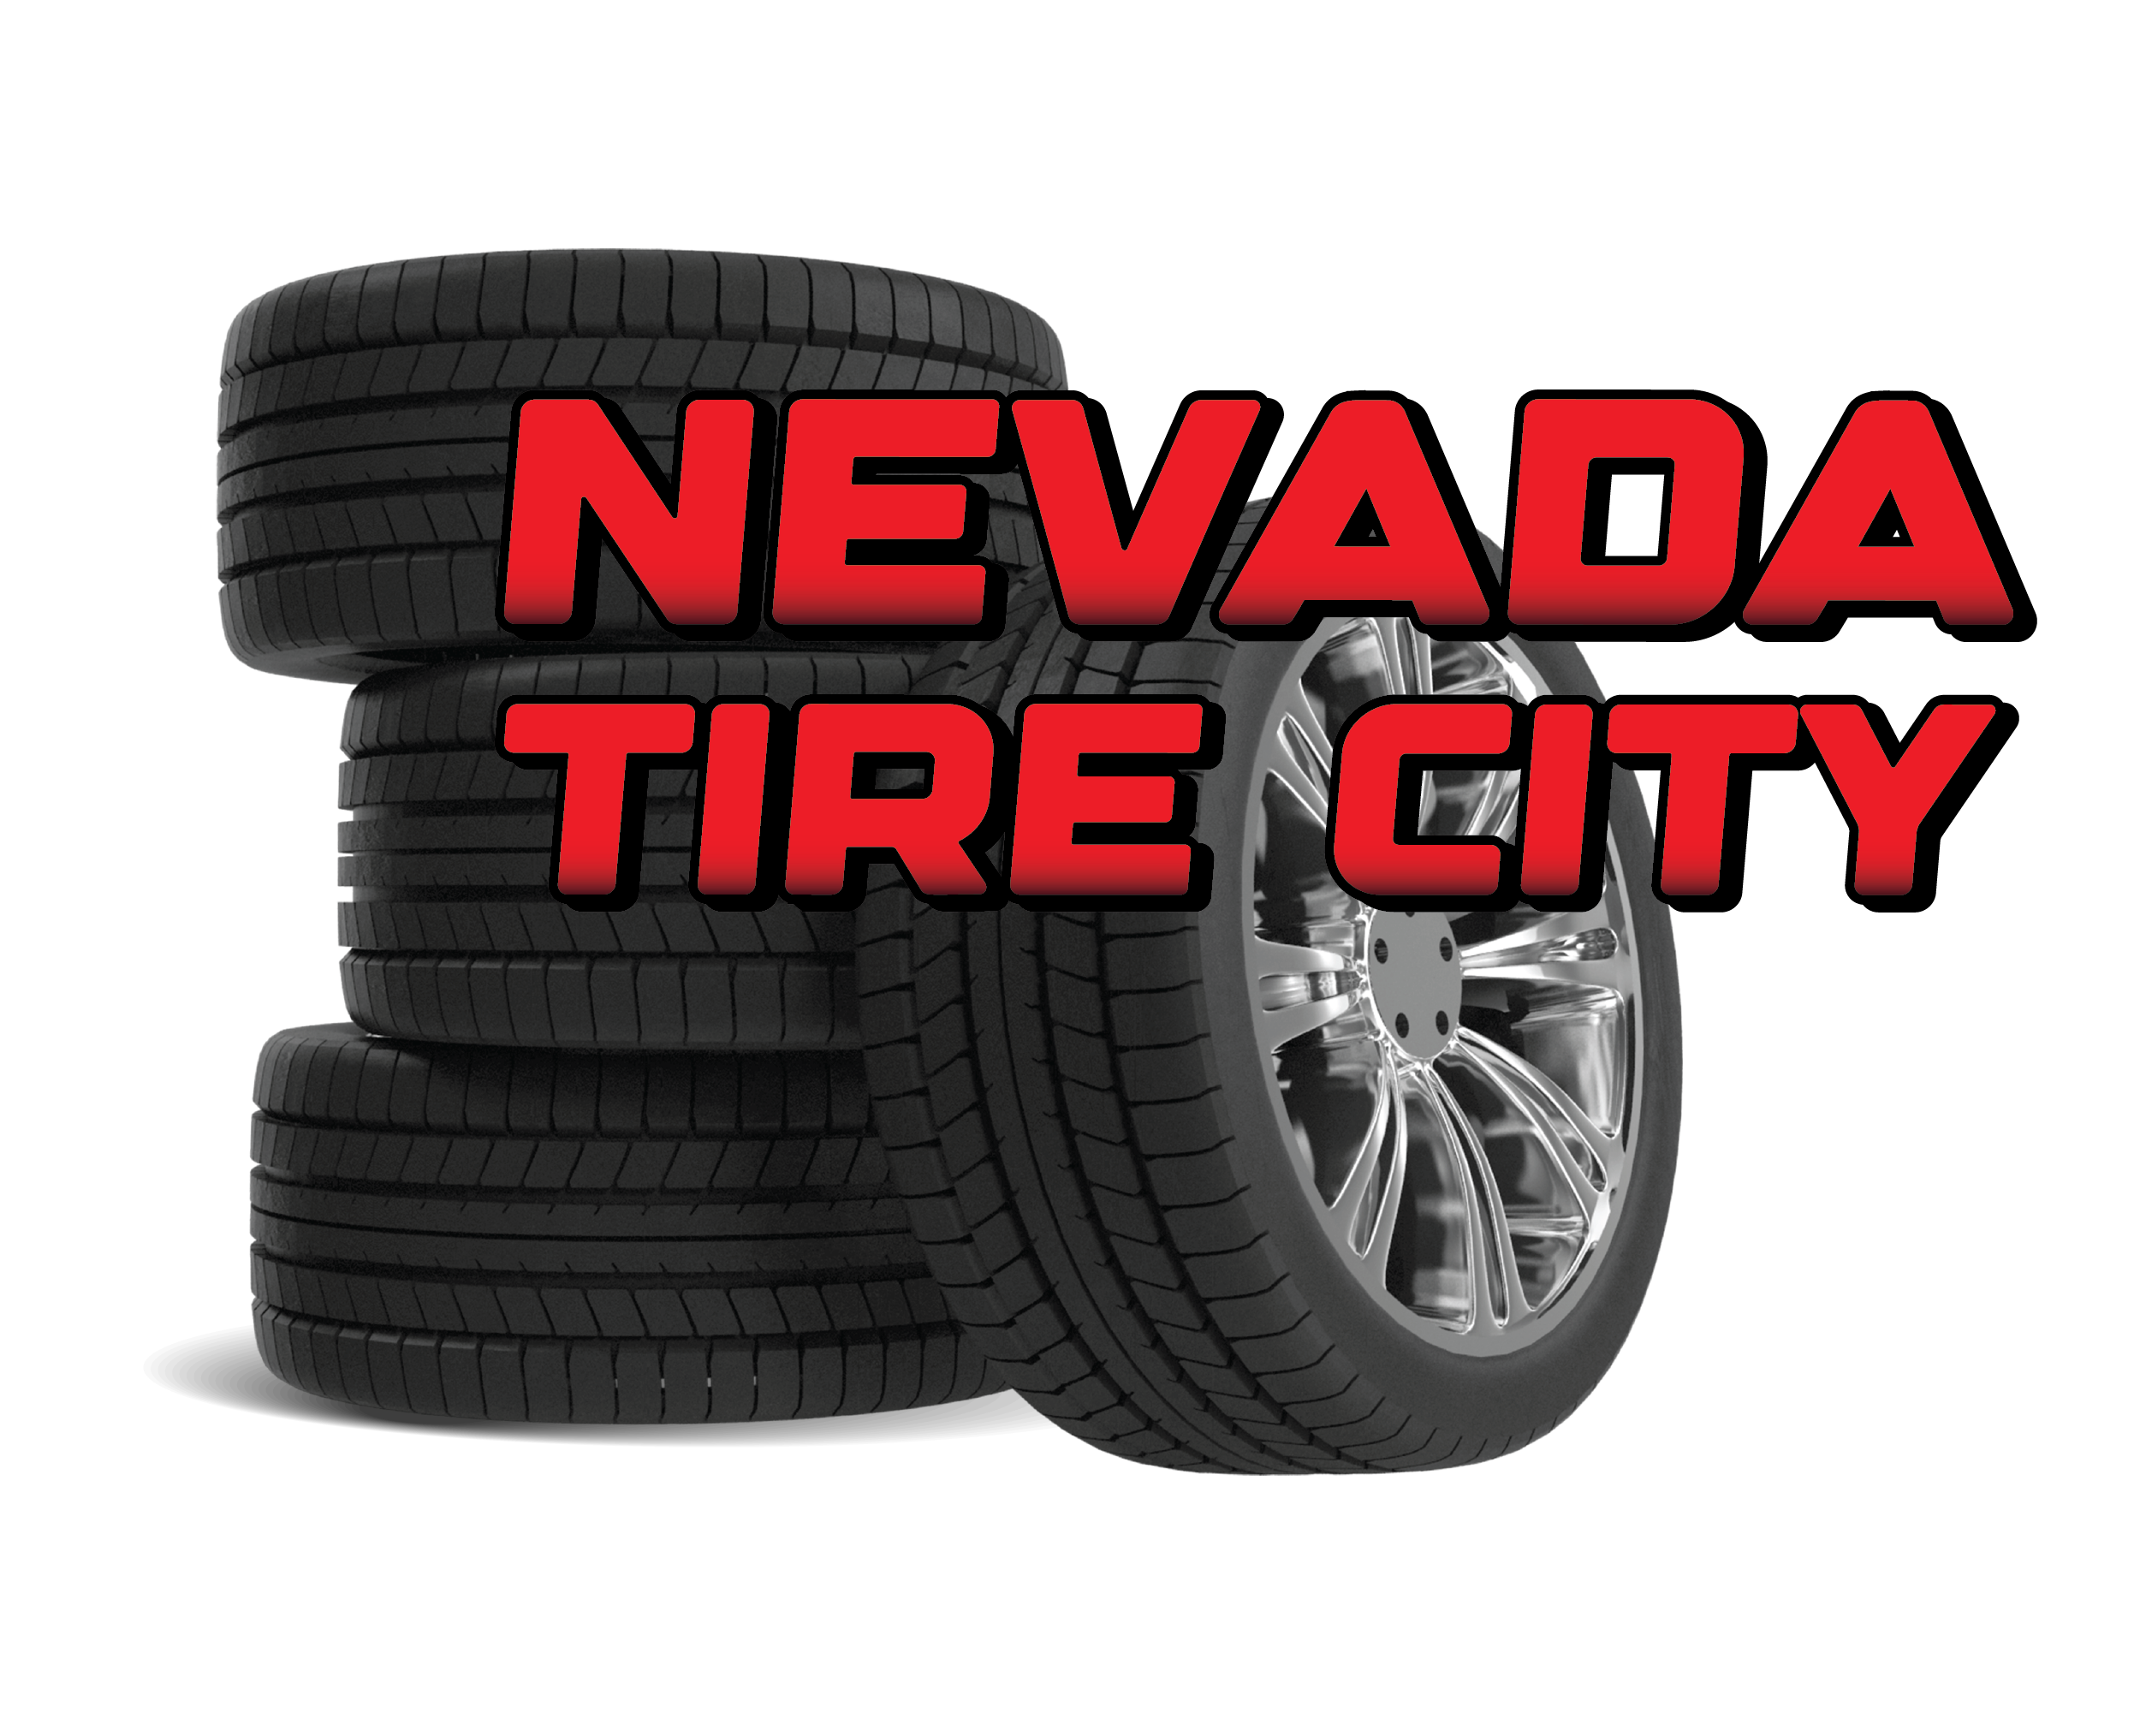 Welcome to Nevada Tire City in Las Vegas, NV 89102